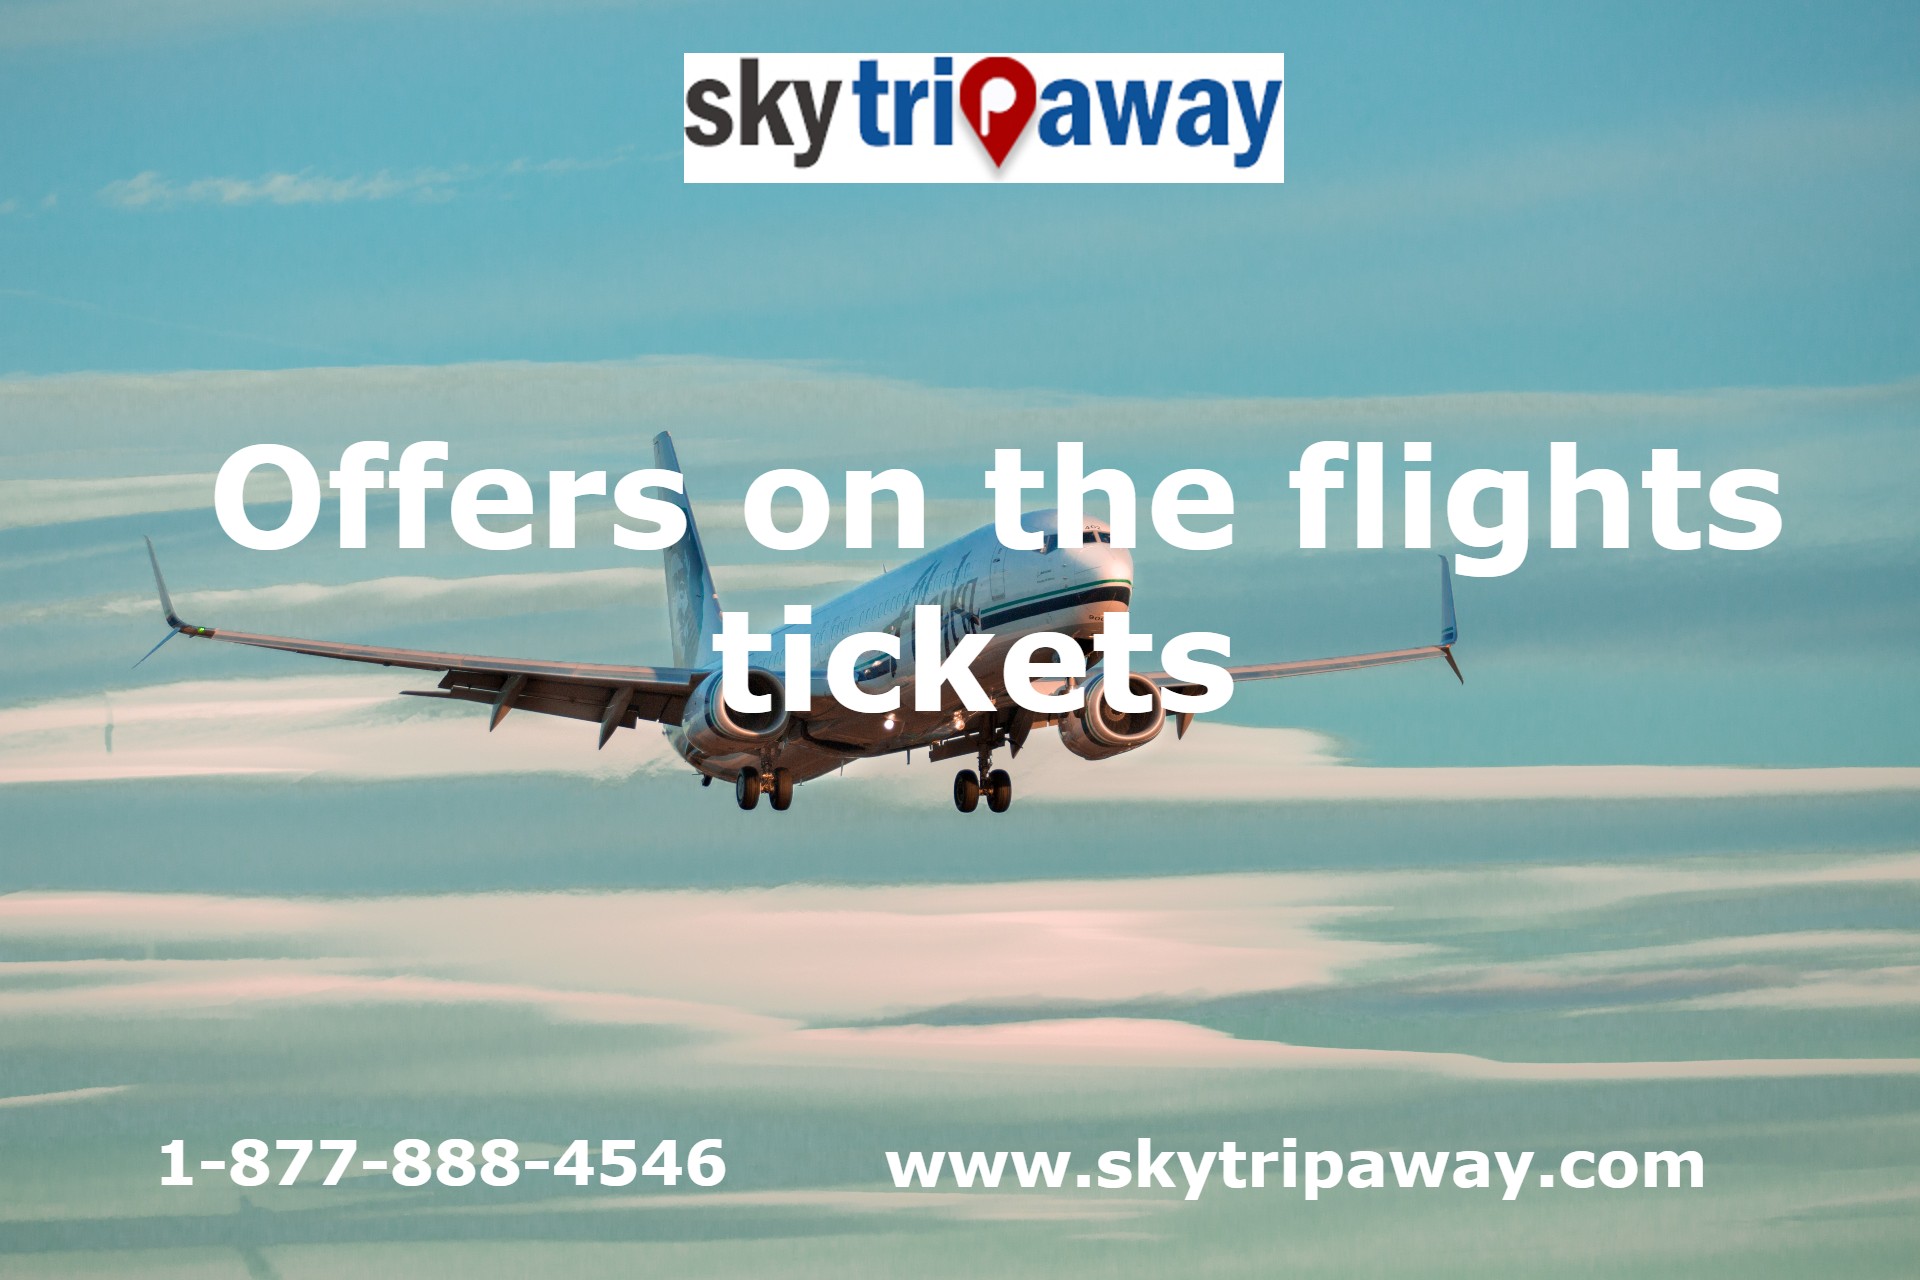 Offers on the flights bookings of klm airlines phone number, Online Event